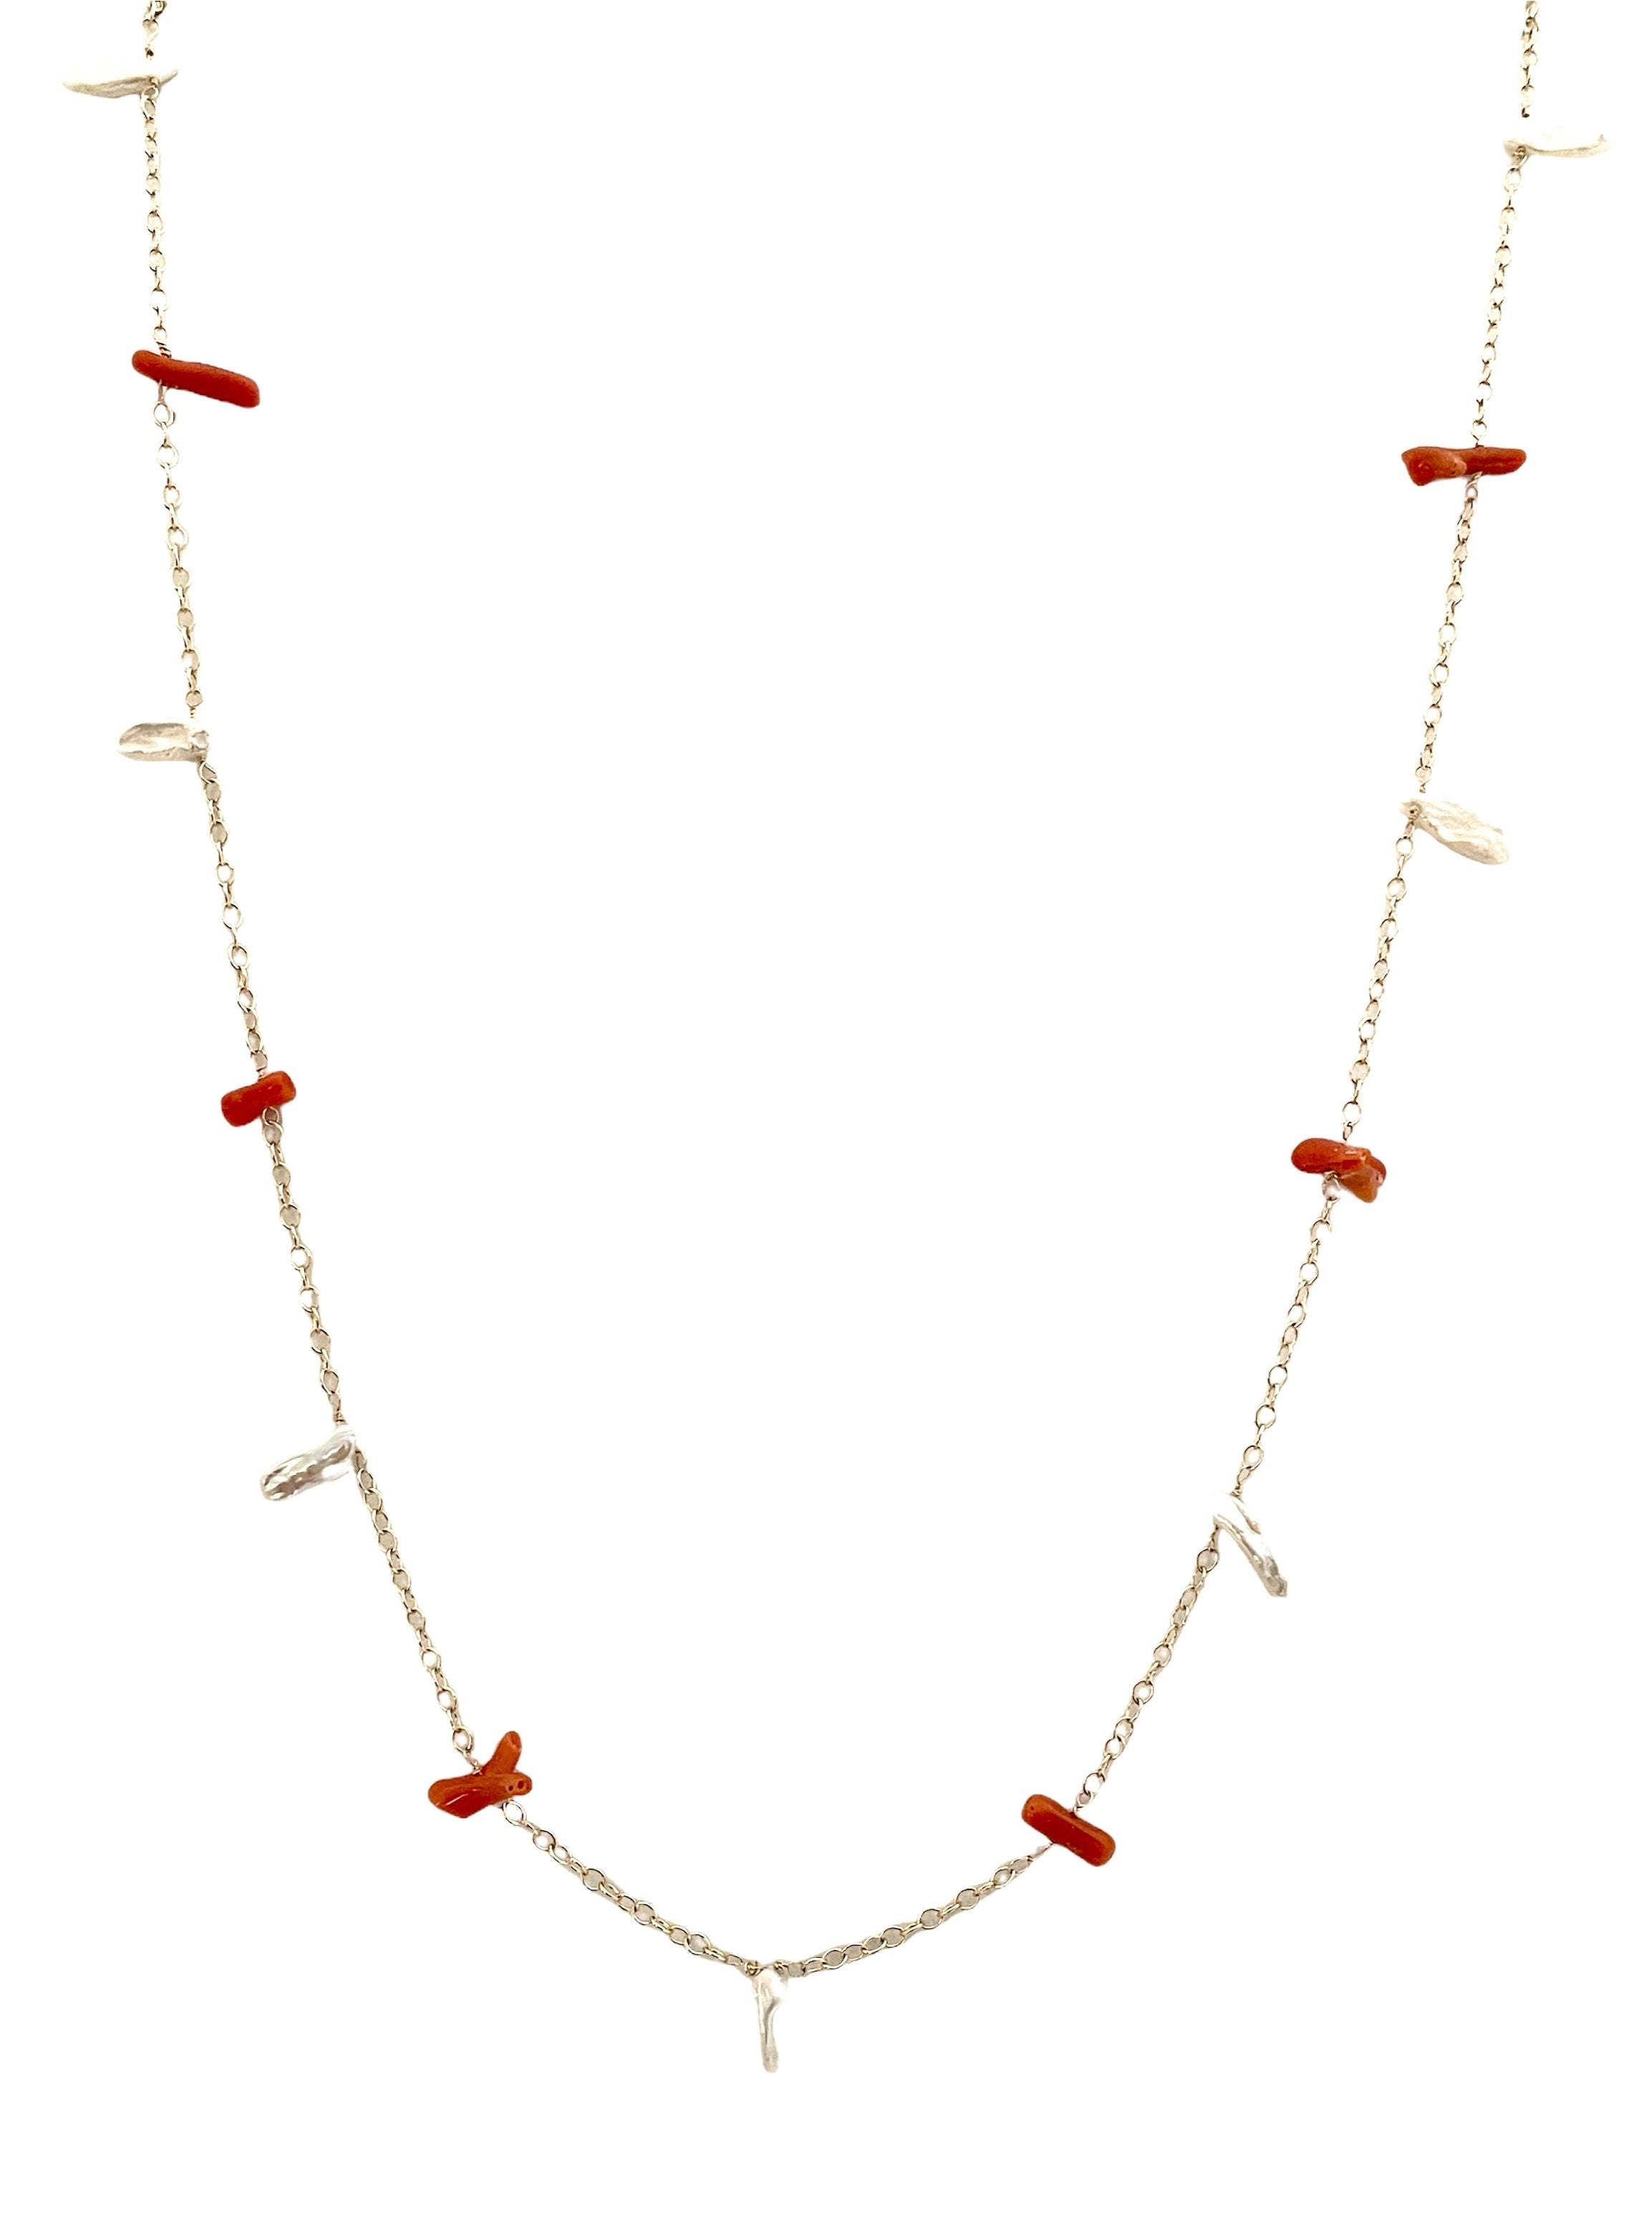 Coral & Pearl Necklace